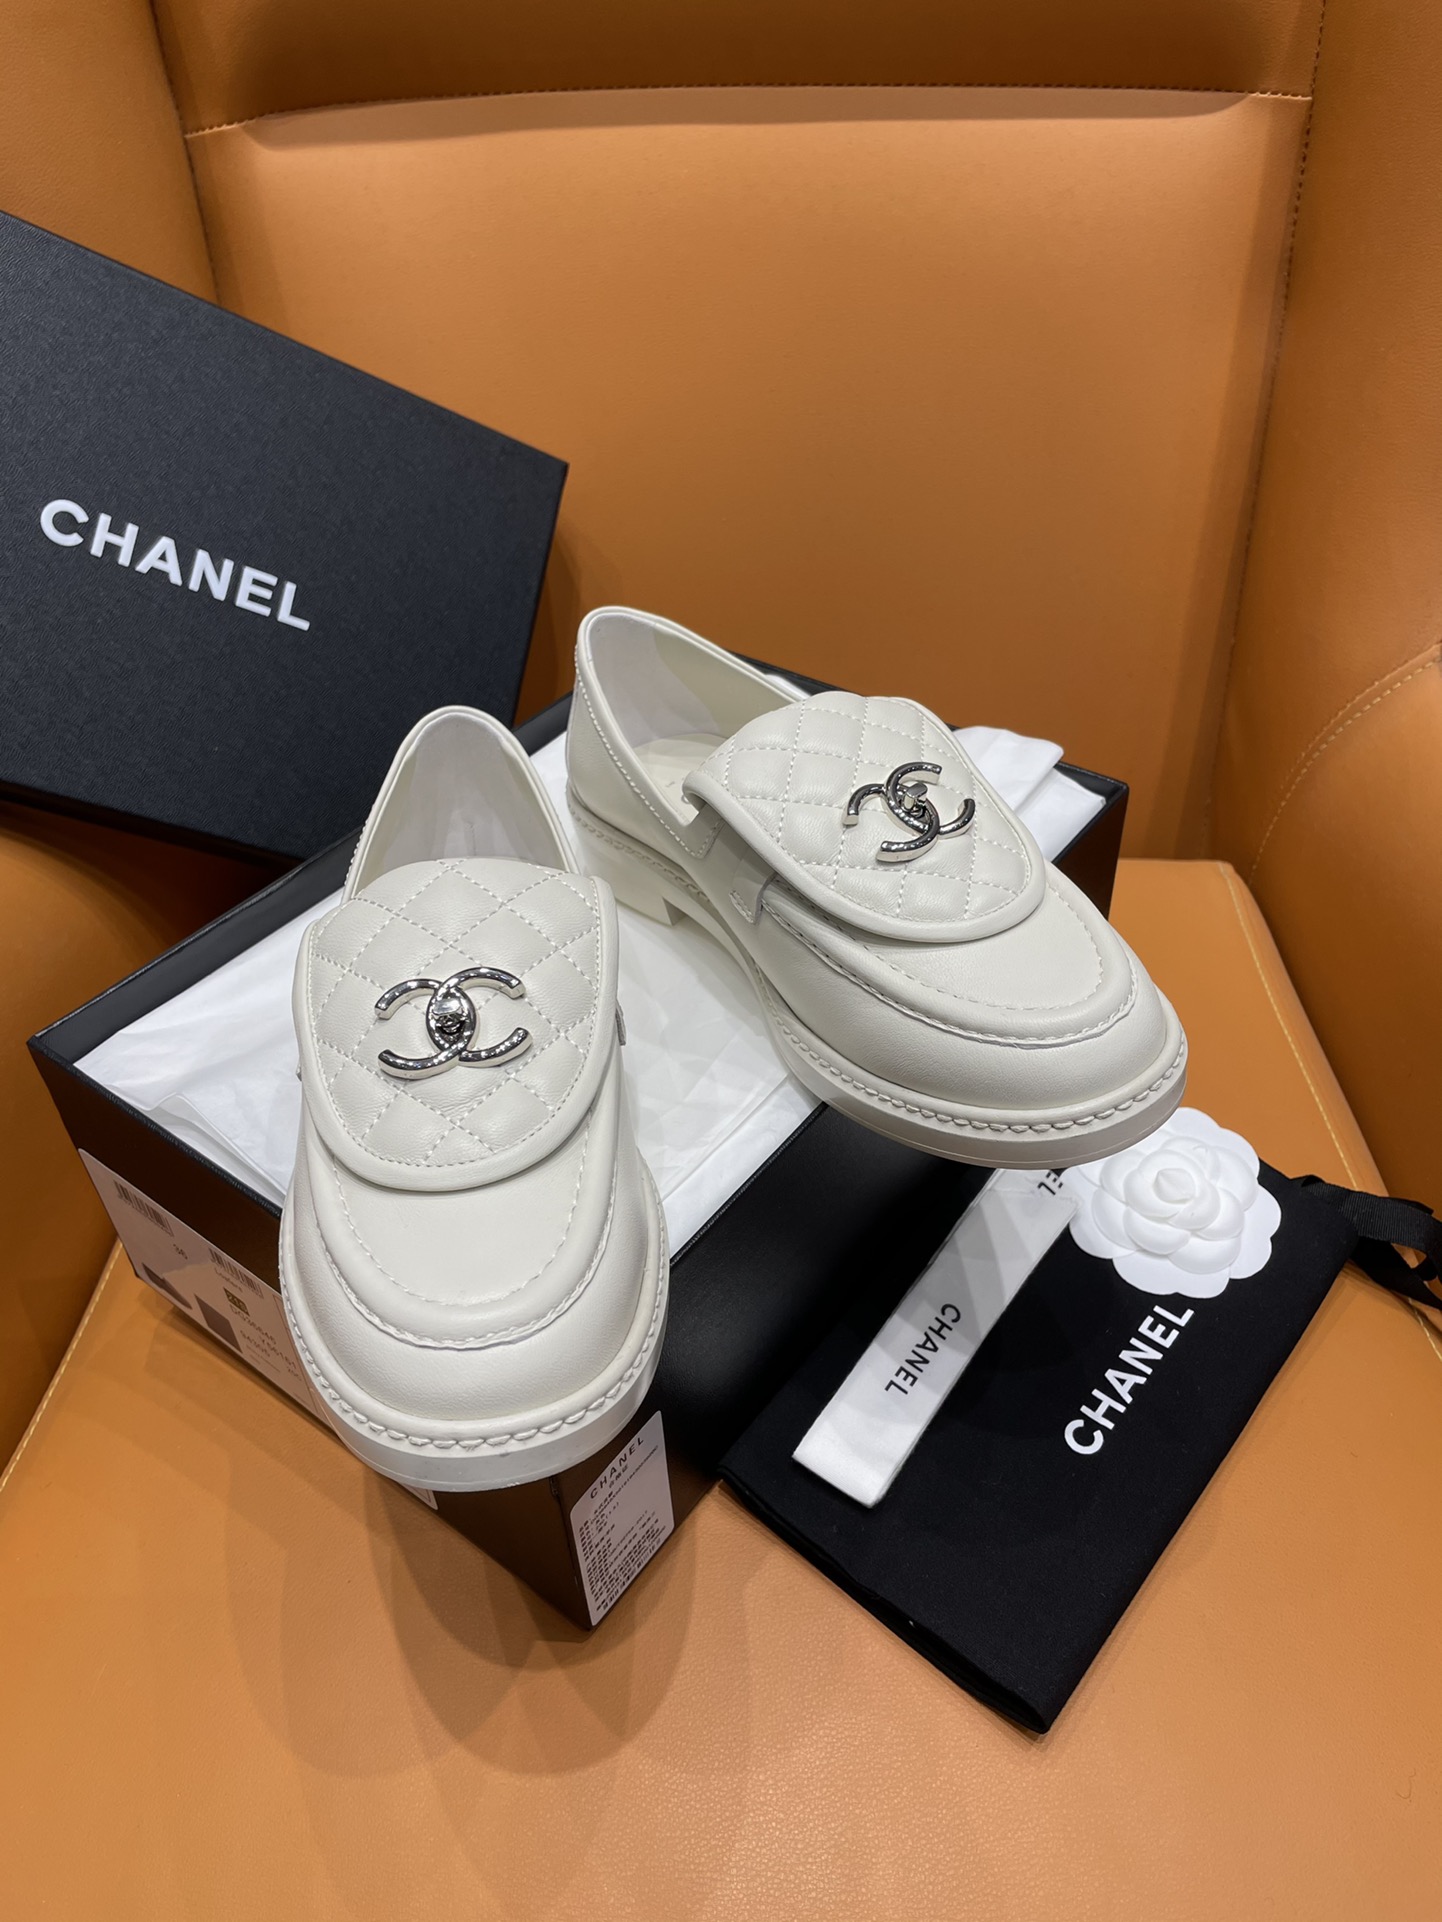 Chanel Shoes Loafers Black Grey White Embroidery Genuine Leather Lambskin Sheepskin Vintage